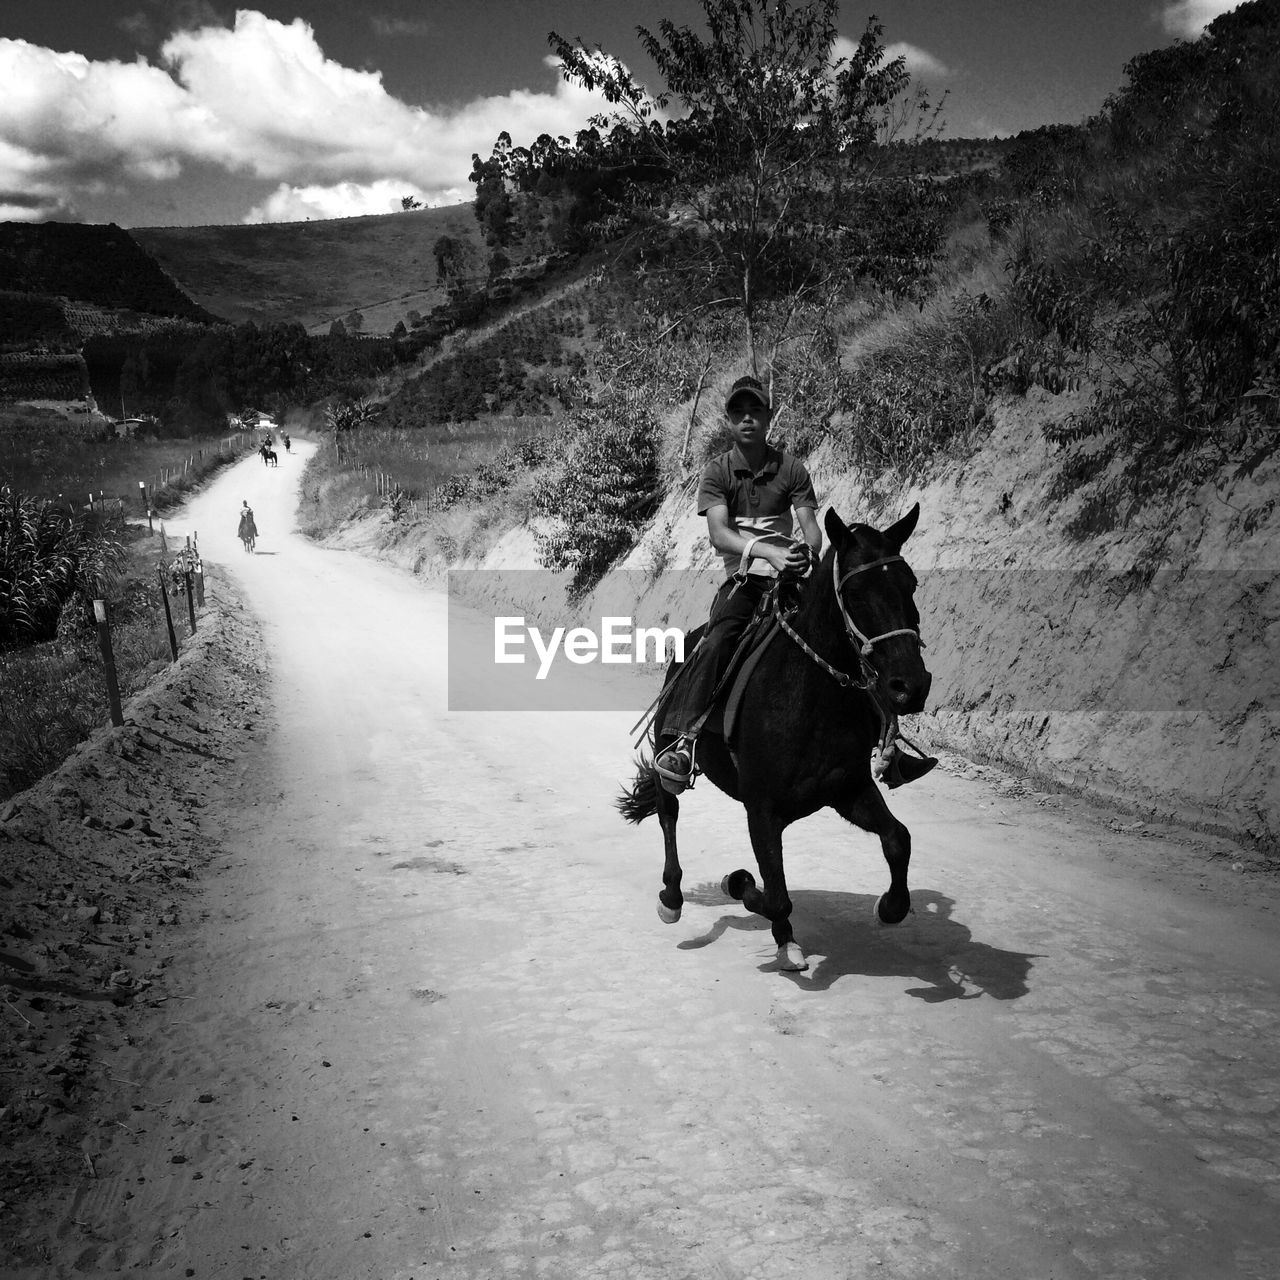 Man riding horse on dirt road by mountain